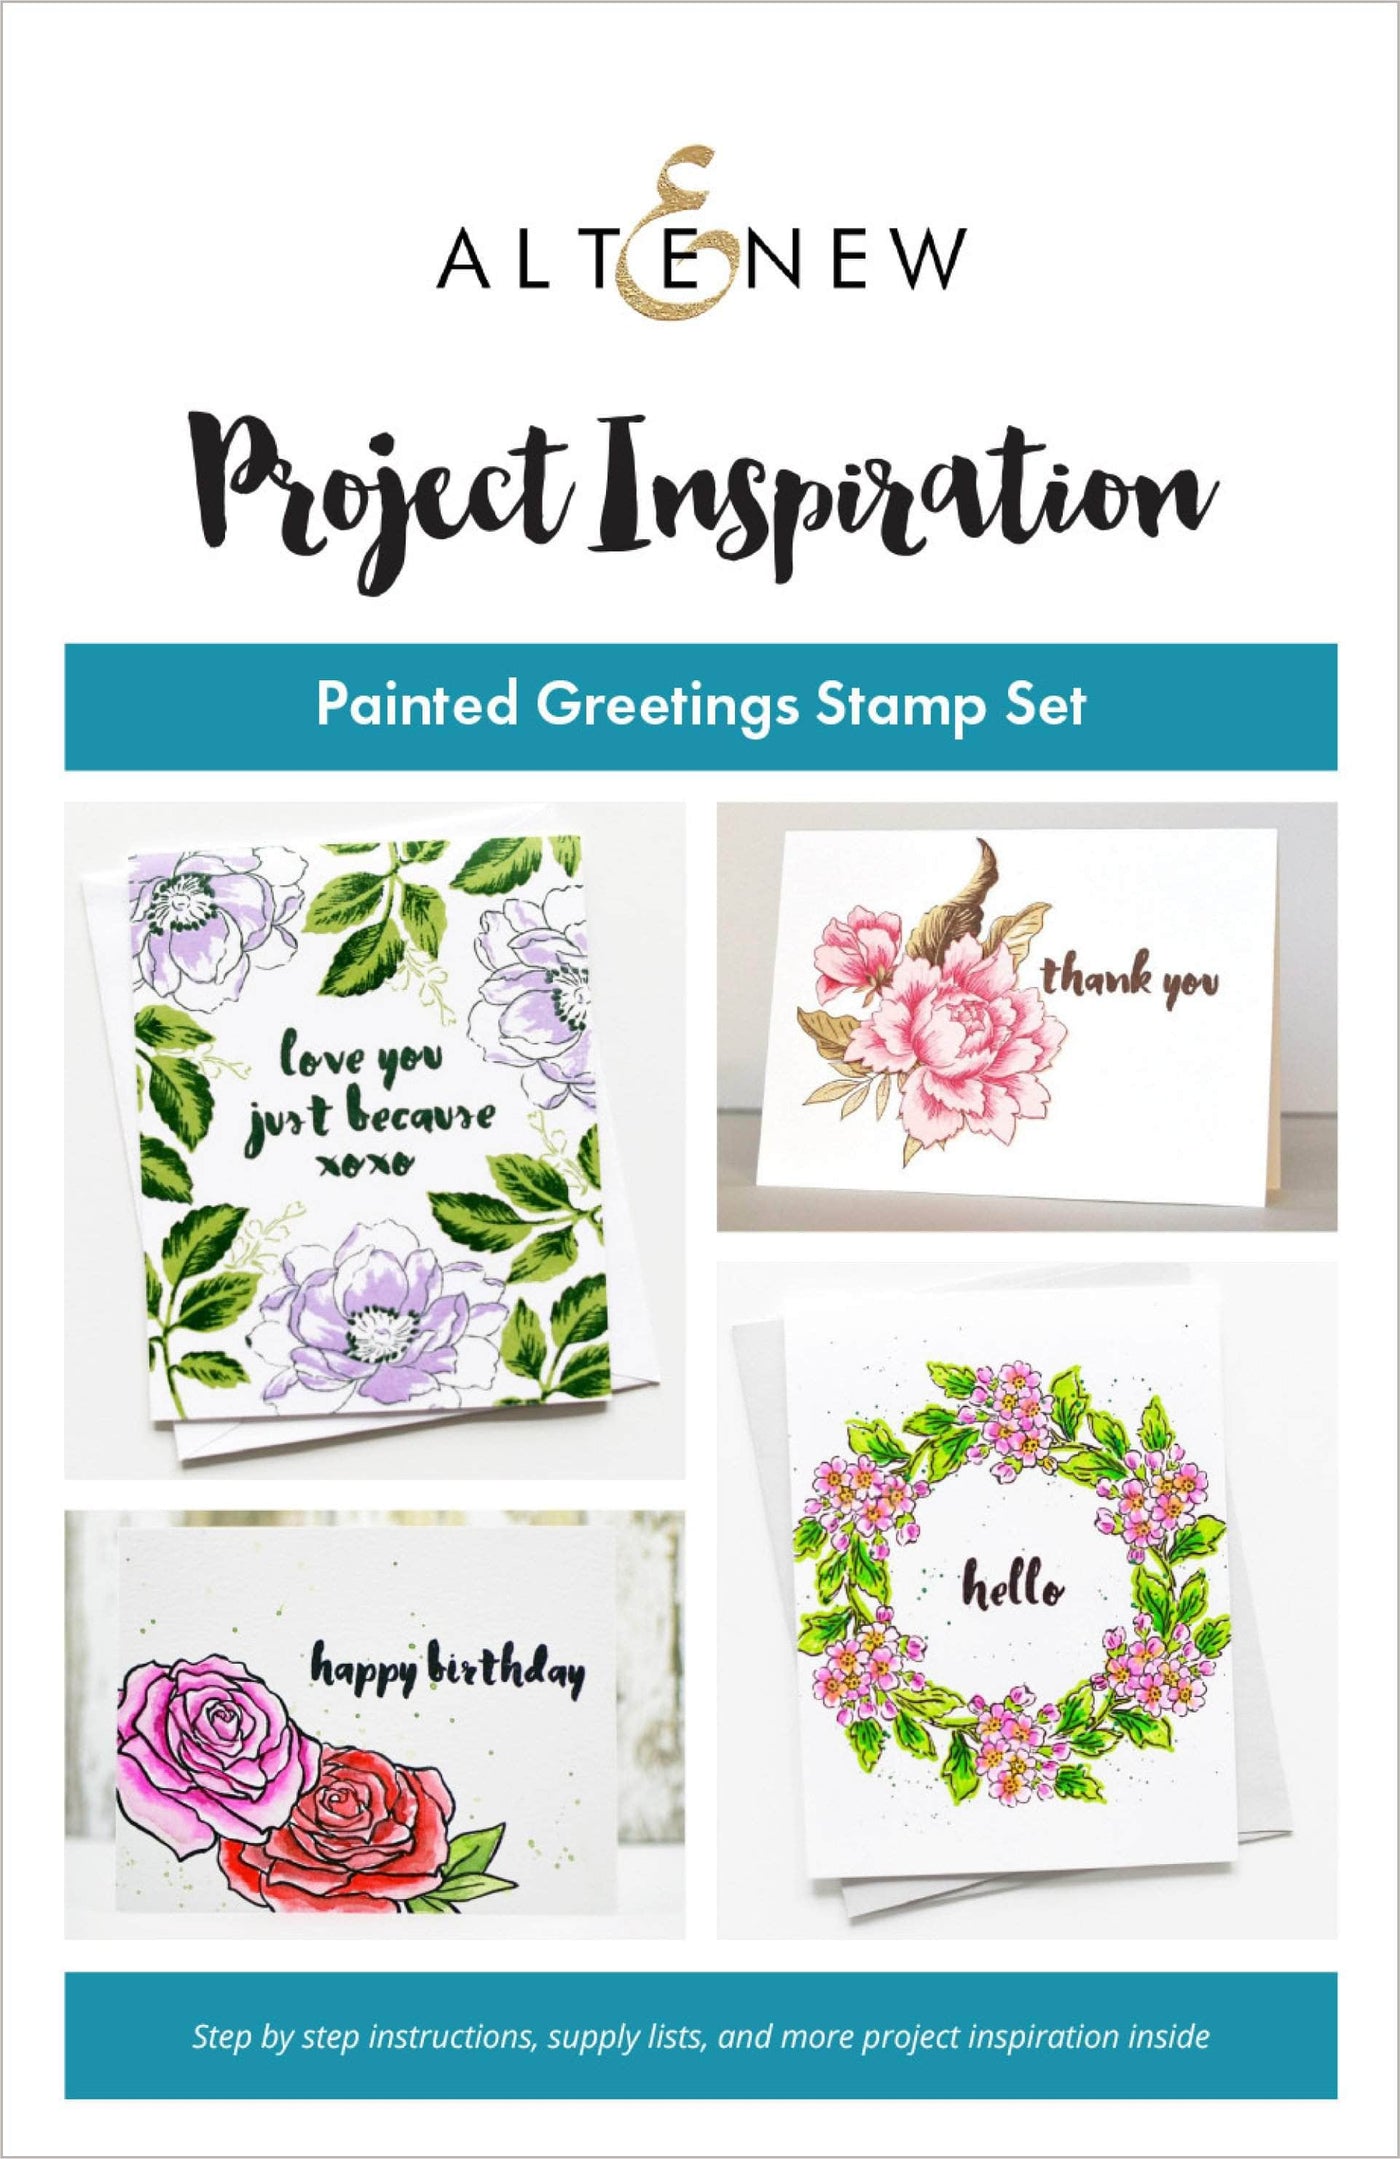 Printed Media Painted Greetings Inspiration Guide